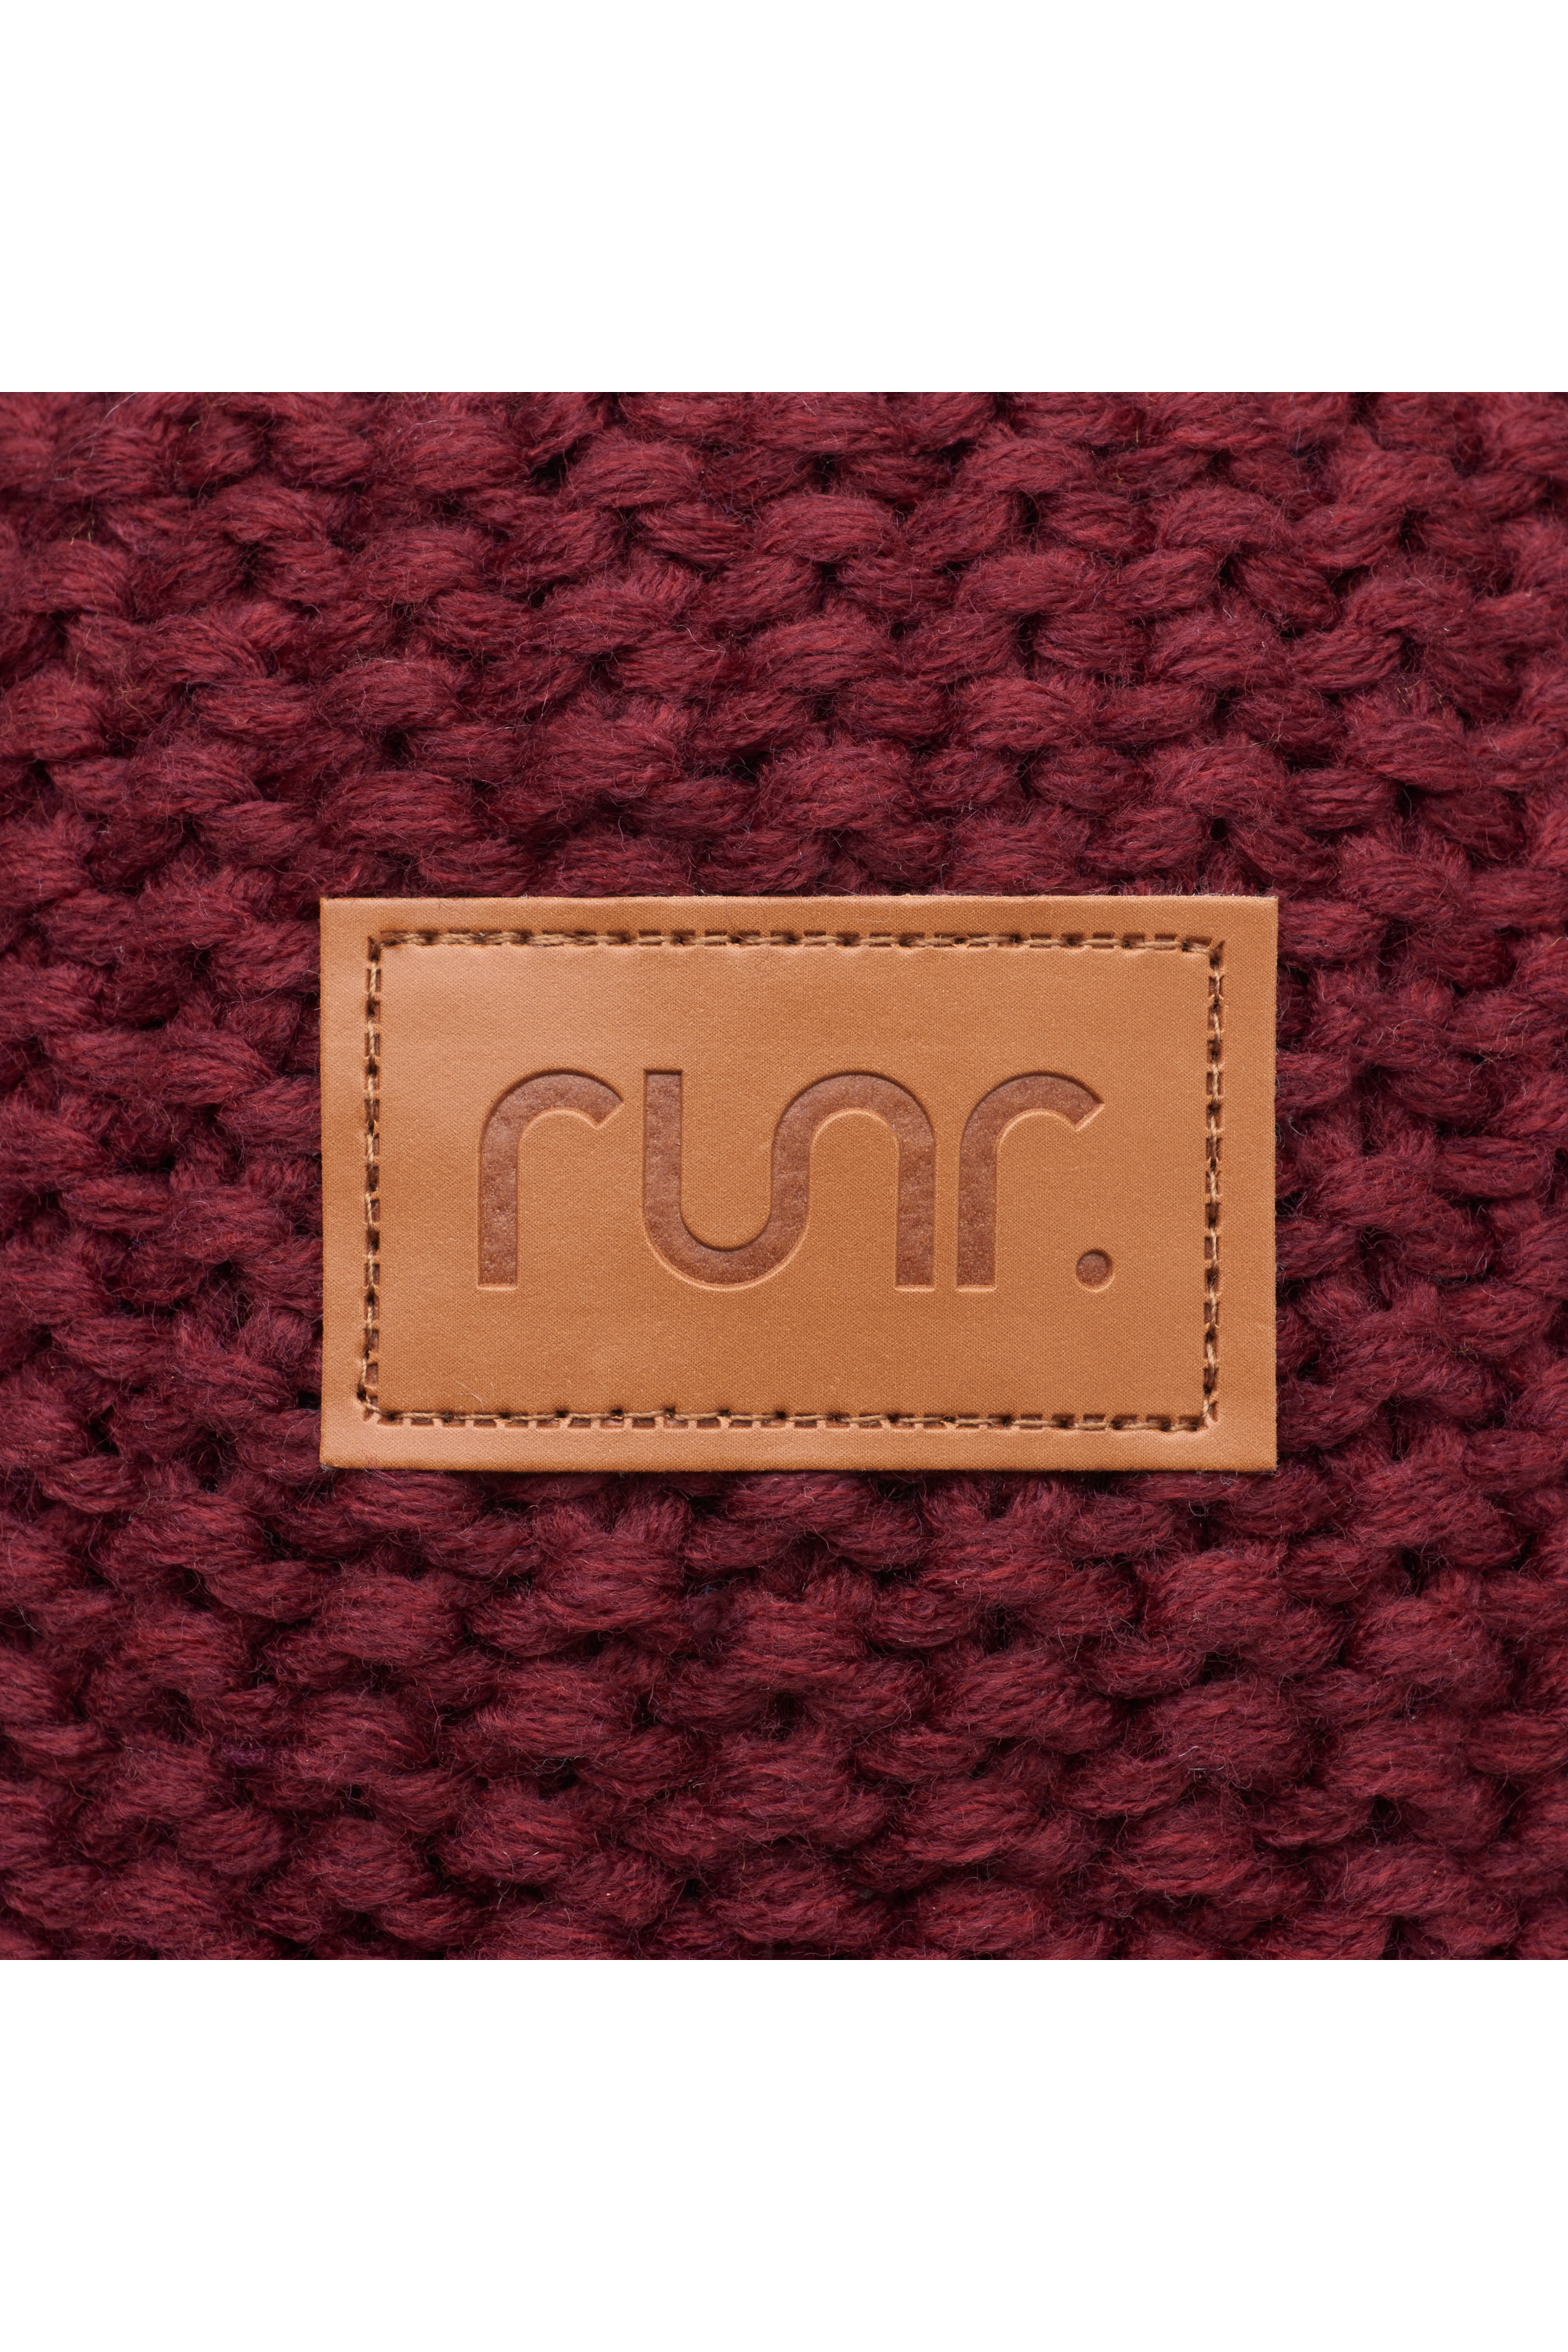 Runr Banff Headband With Faux Leather Label